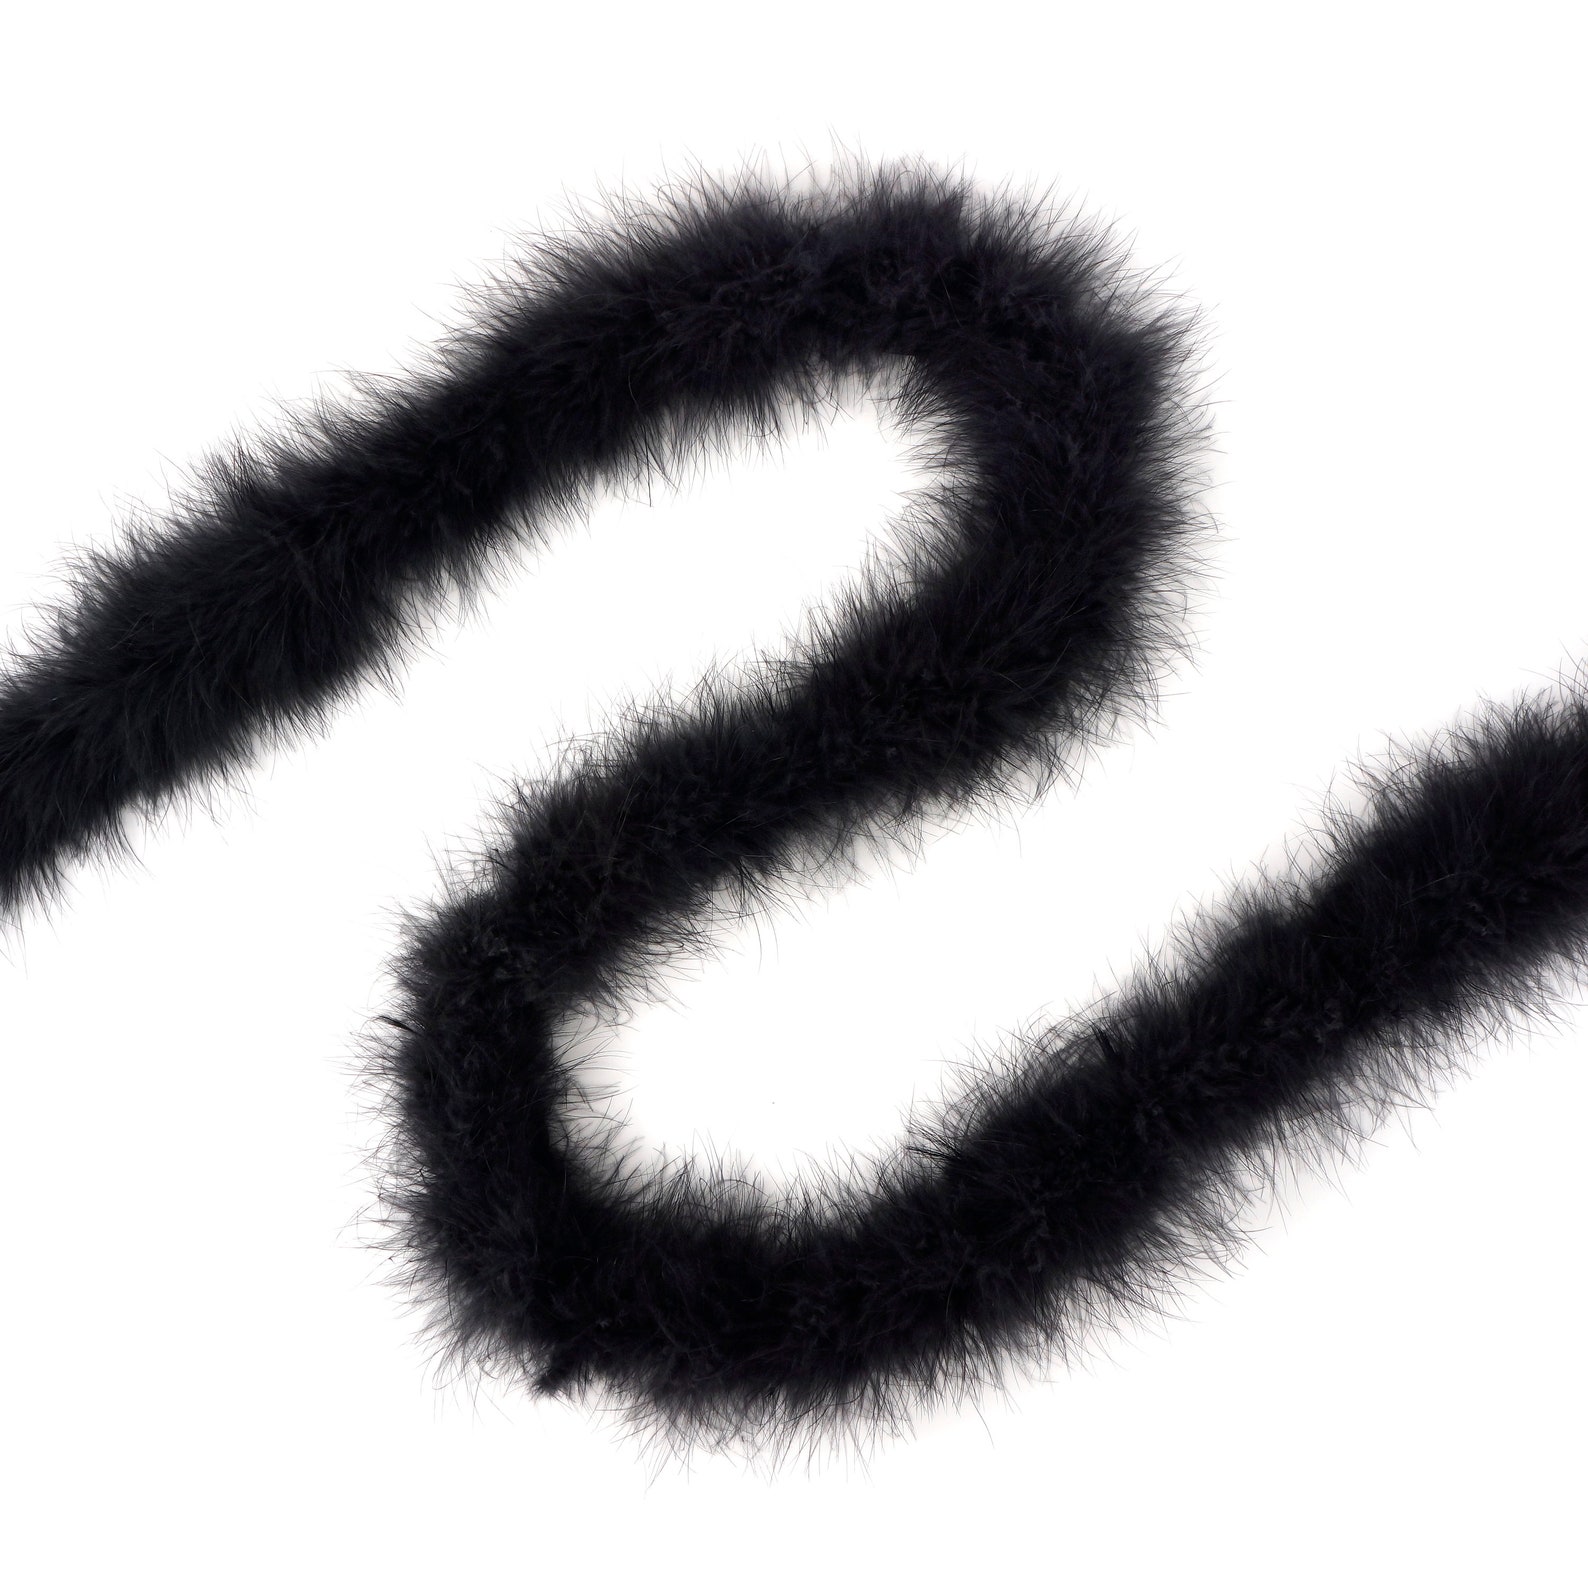 BLACK Marabou Feather Boa Heavy Weight 25 Grams 2 Yards for - Etsy